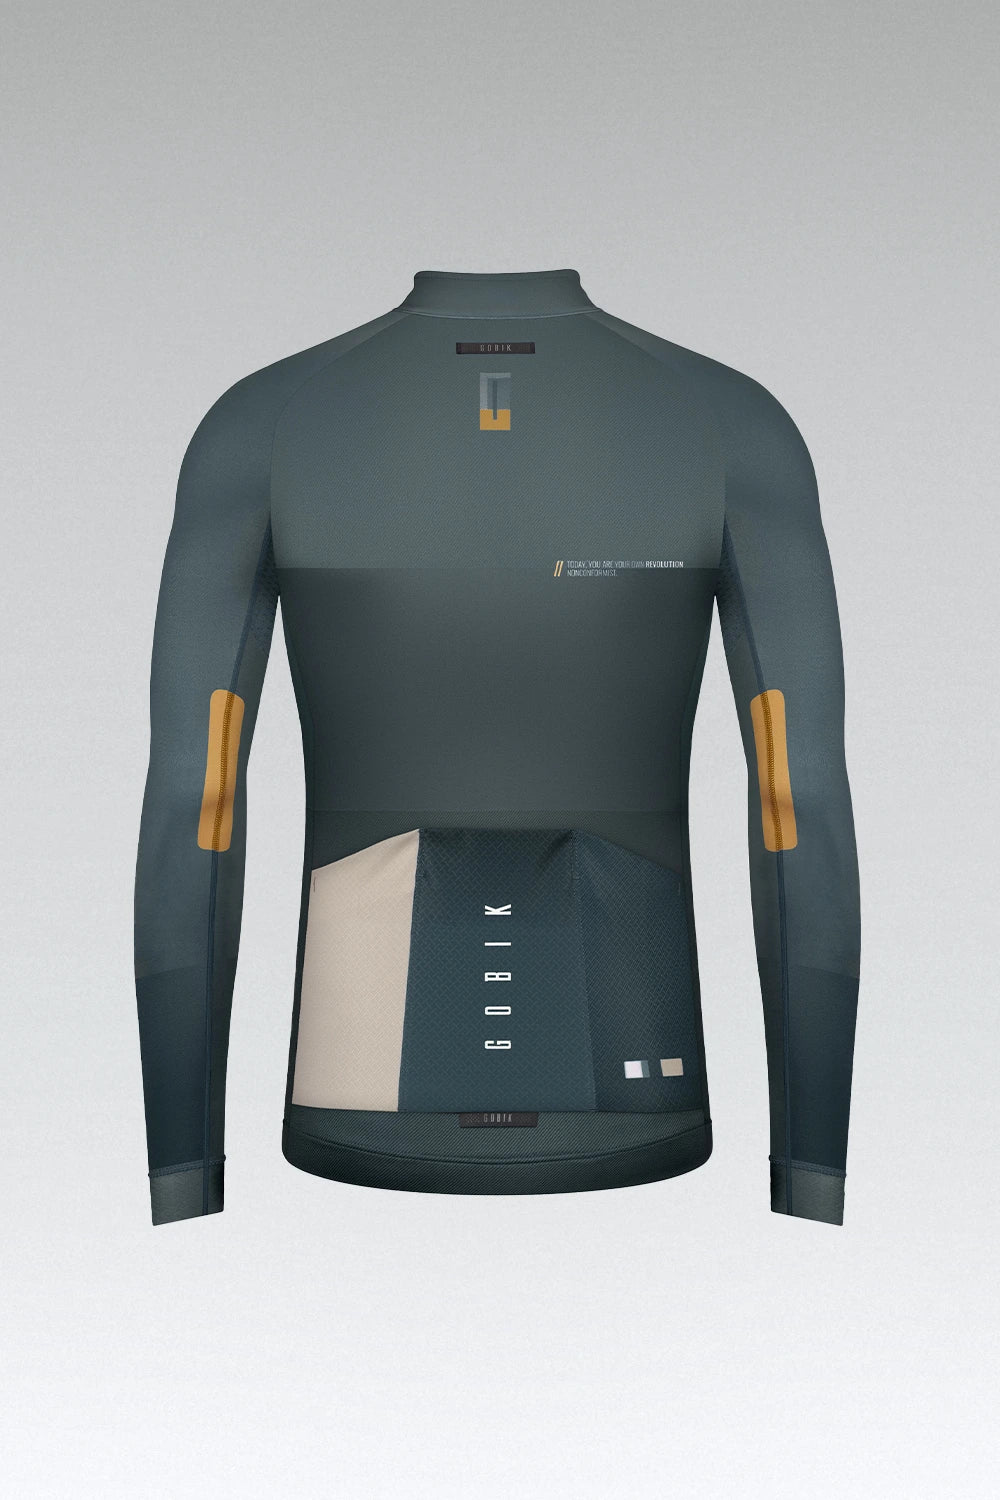 LONG SLEEVE JERSEY PACER UNISEX KERSAL